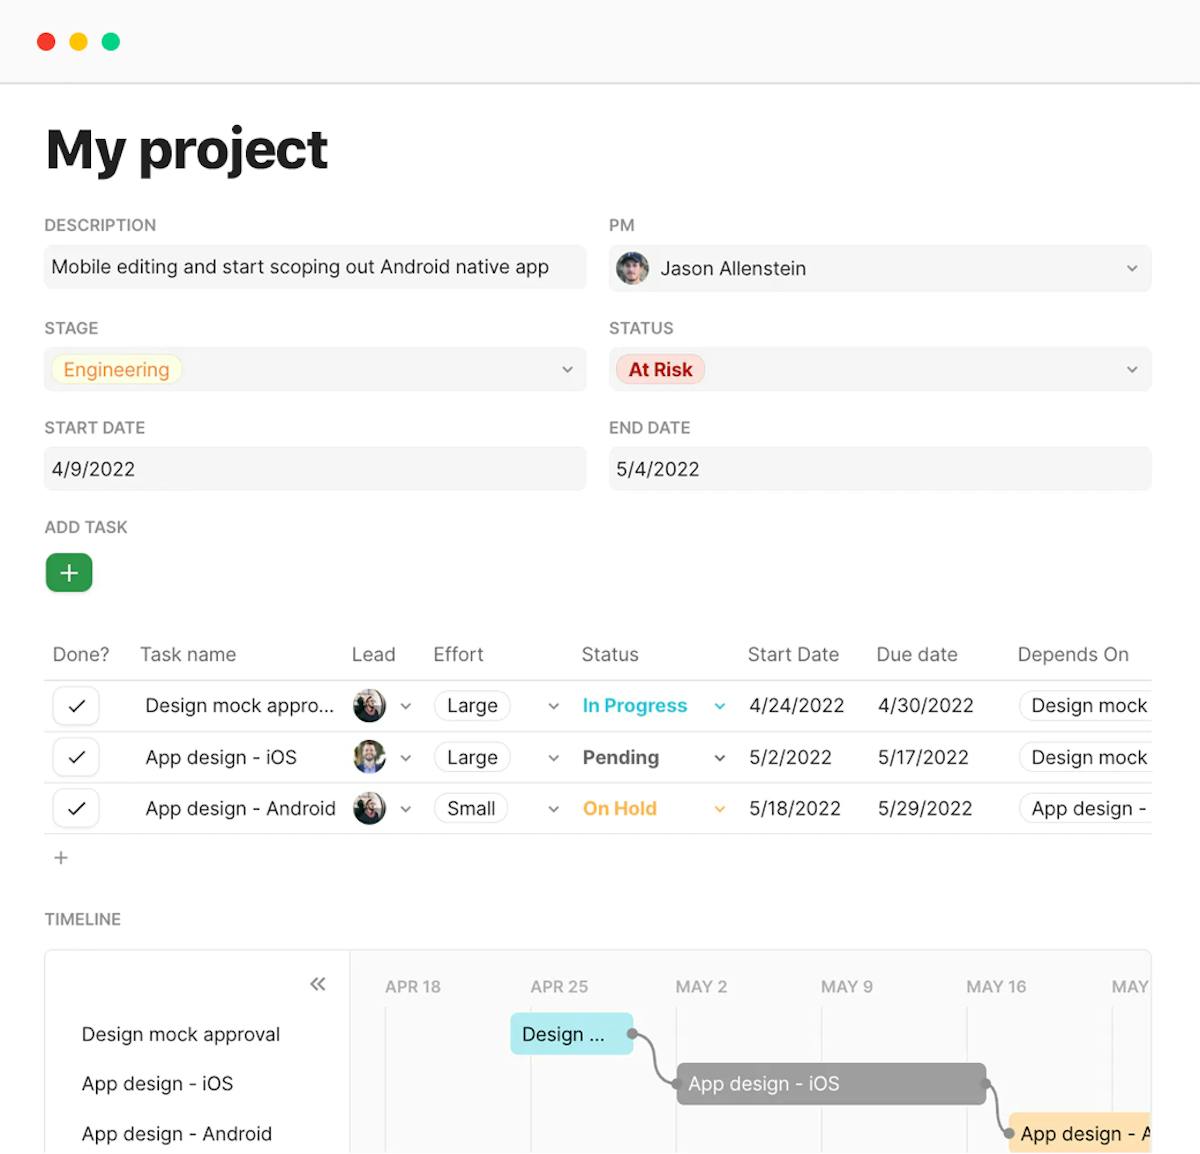 Screenshot of a project with a task list and a timeline with dependencies